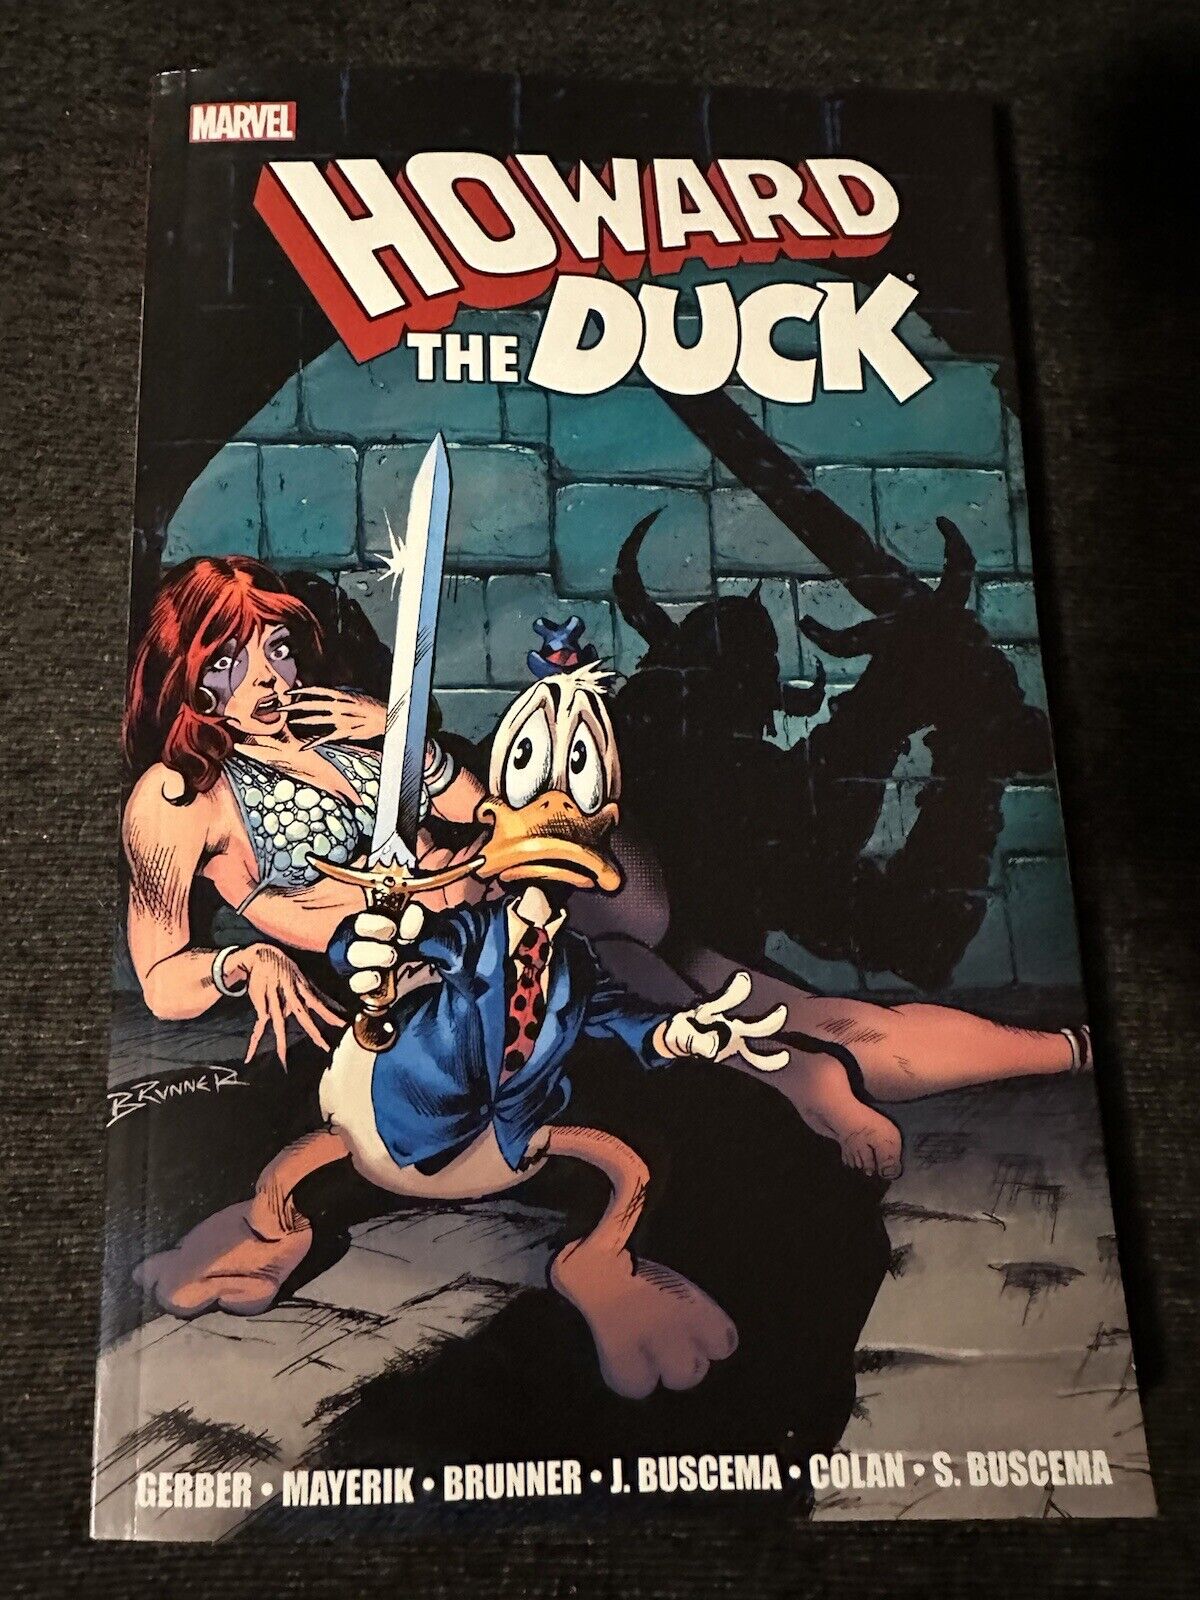 Howard the Duck: the Complete Collection #1 (Marvel Comics 2015)